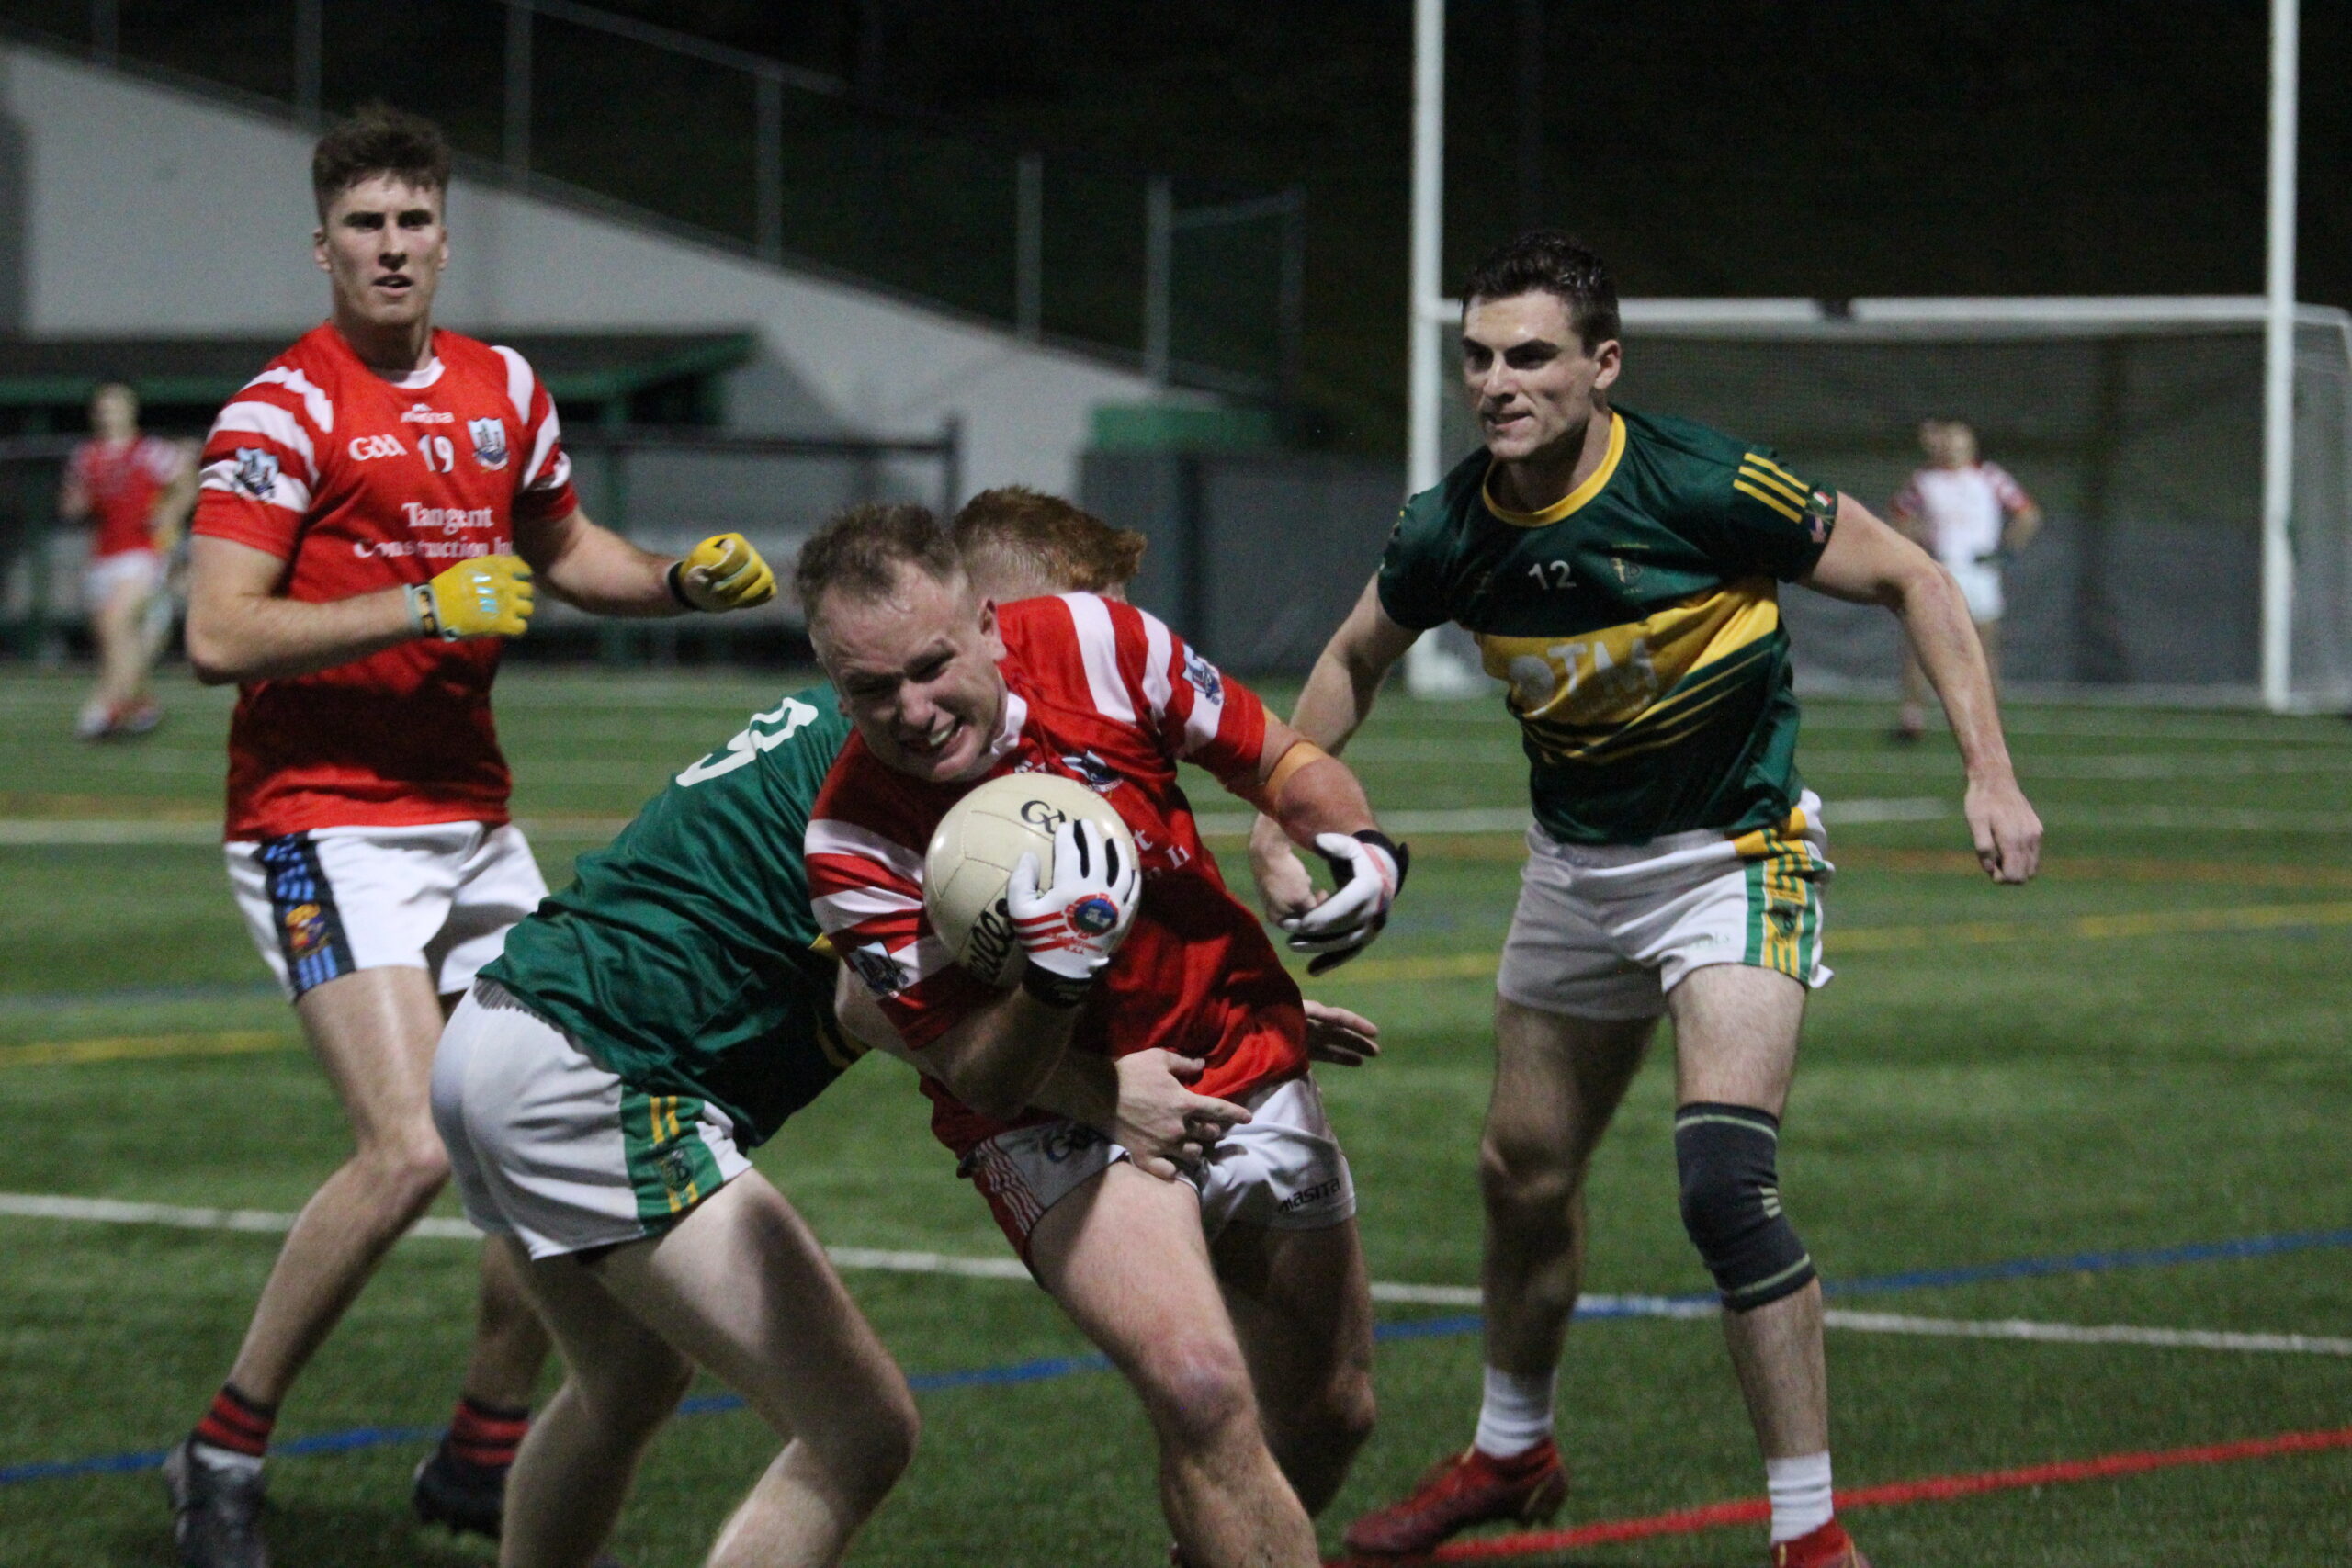 Cork's Niall Judge on the ball (Photo by Sharon Redican)